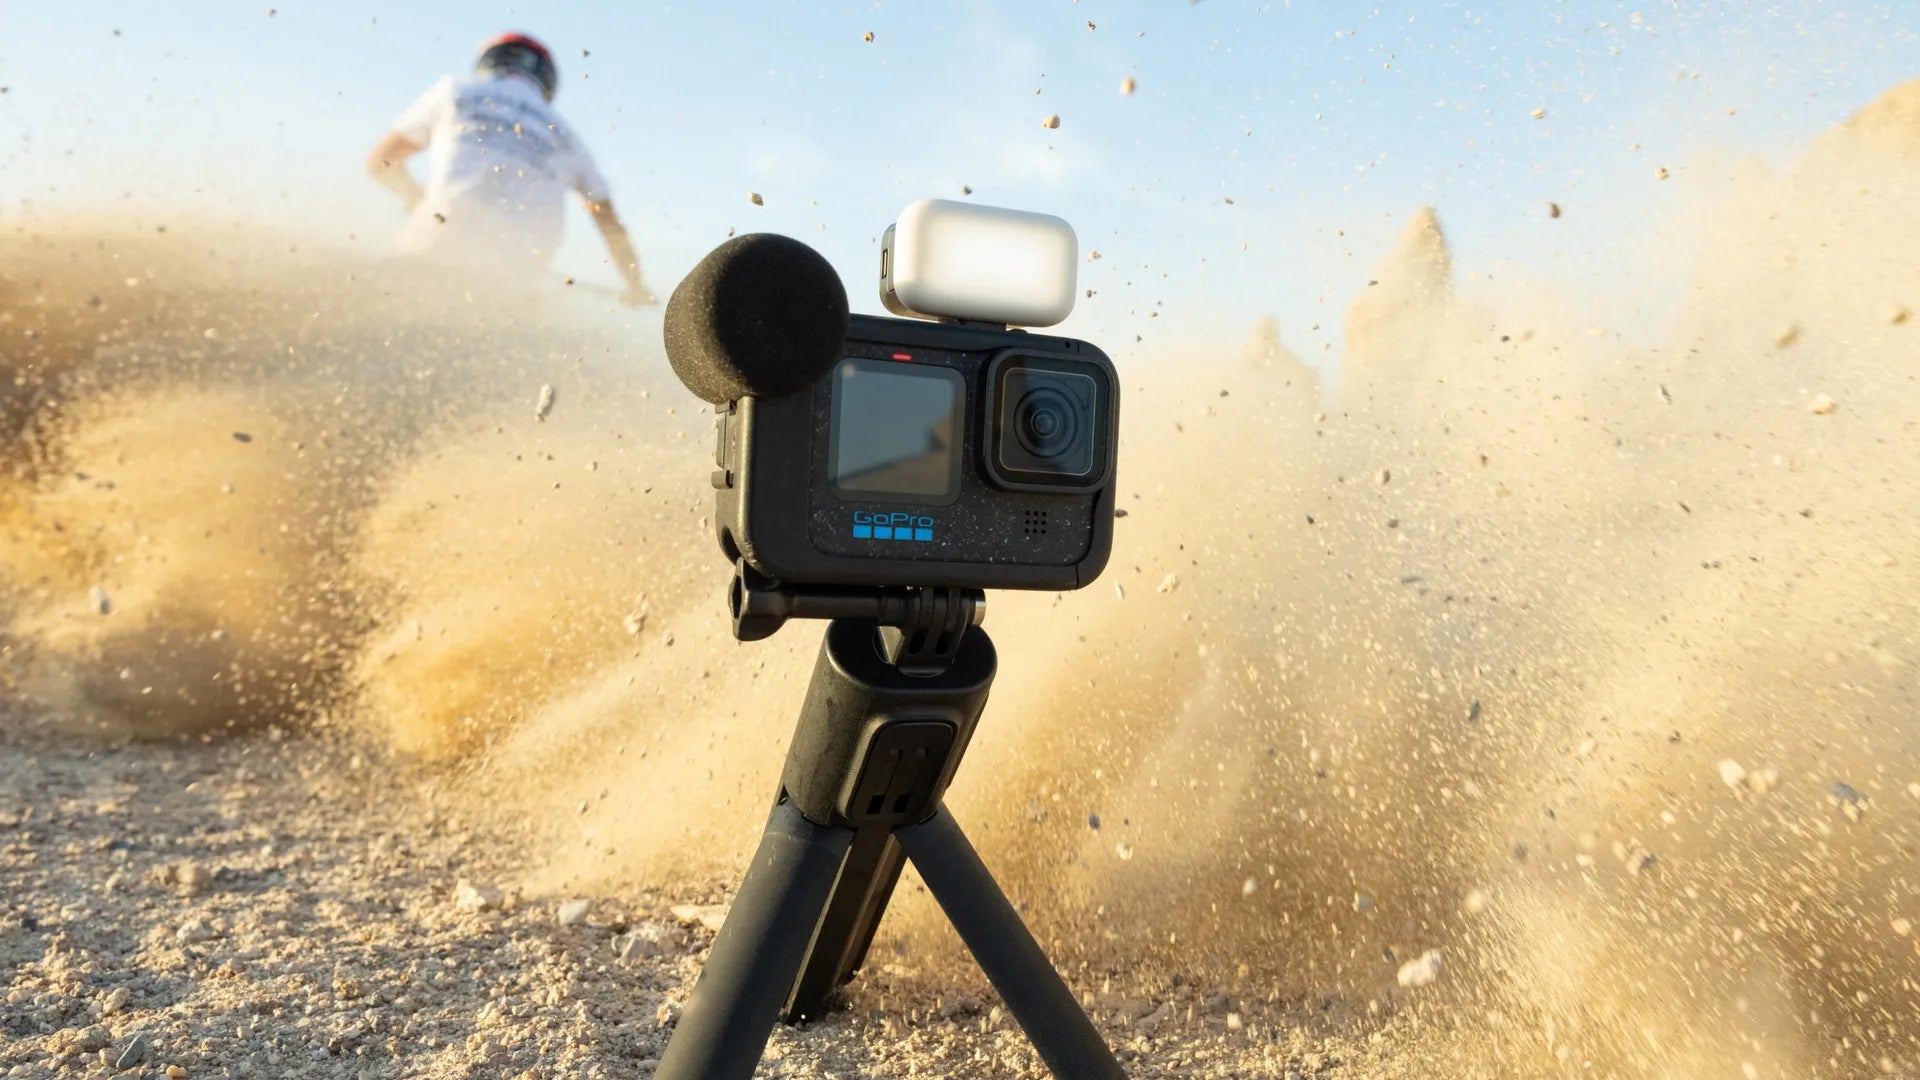 GoPro mounted to a tripod with a dirt bike in the background